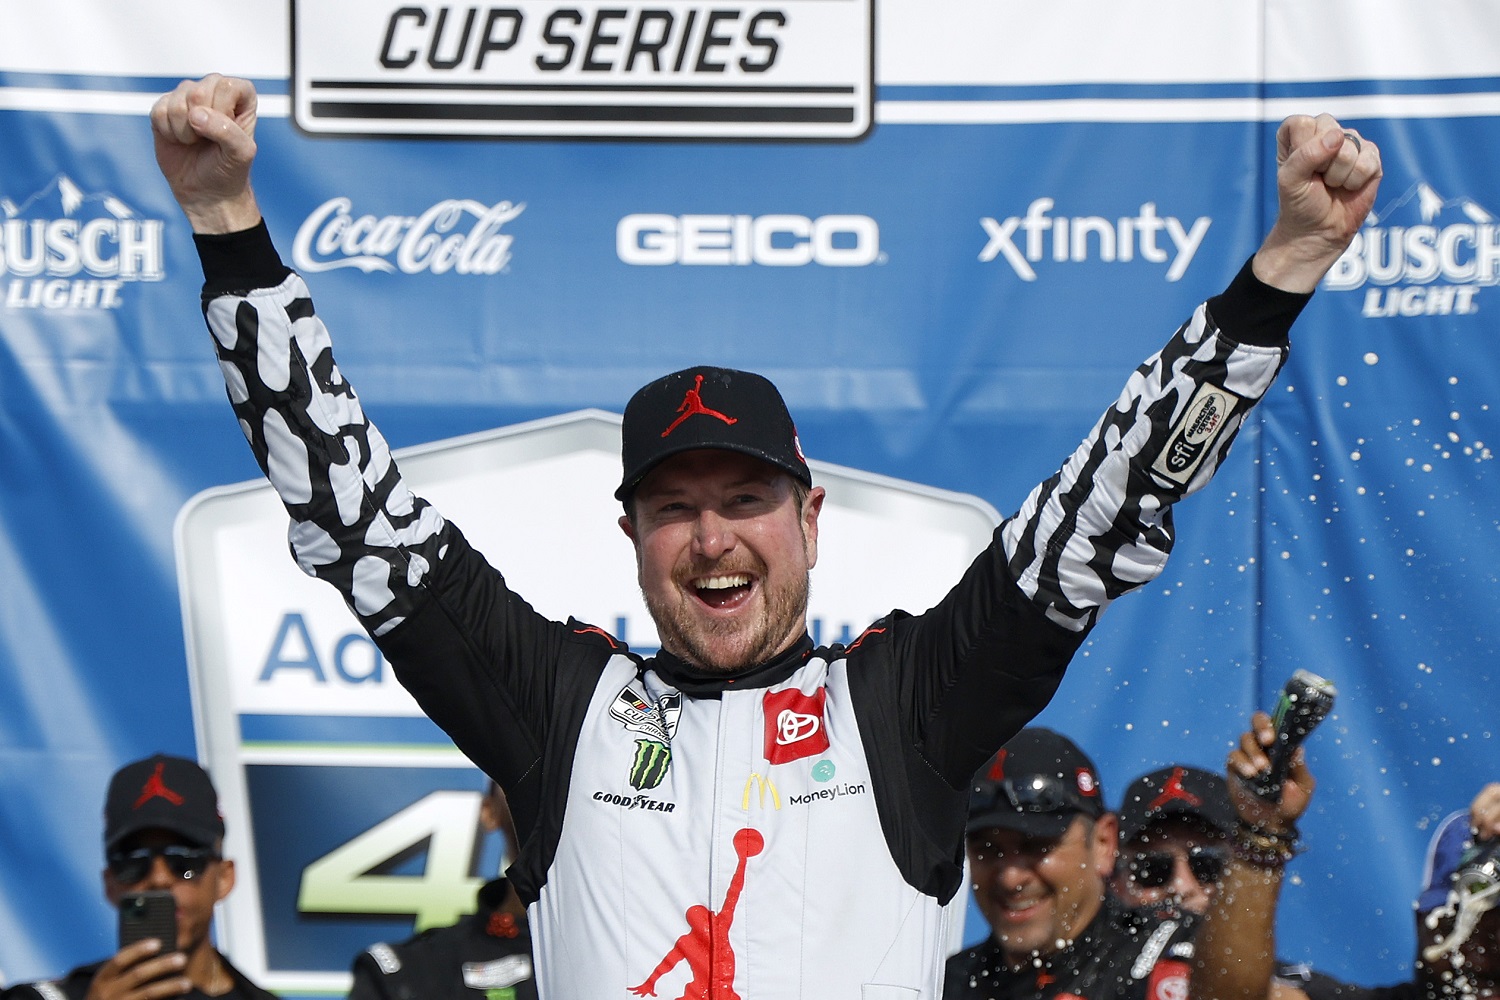 Kurt Busch celebrates in Victory Lane after winning the NASCAR Cup Series AdventHealth 400 at Kansas Speedway on May 15, 2022. | Chris Graythen/Getty Images